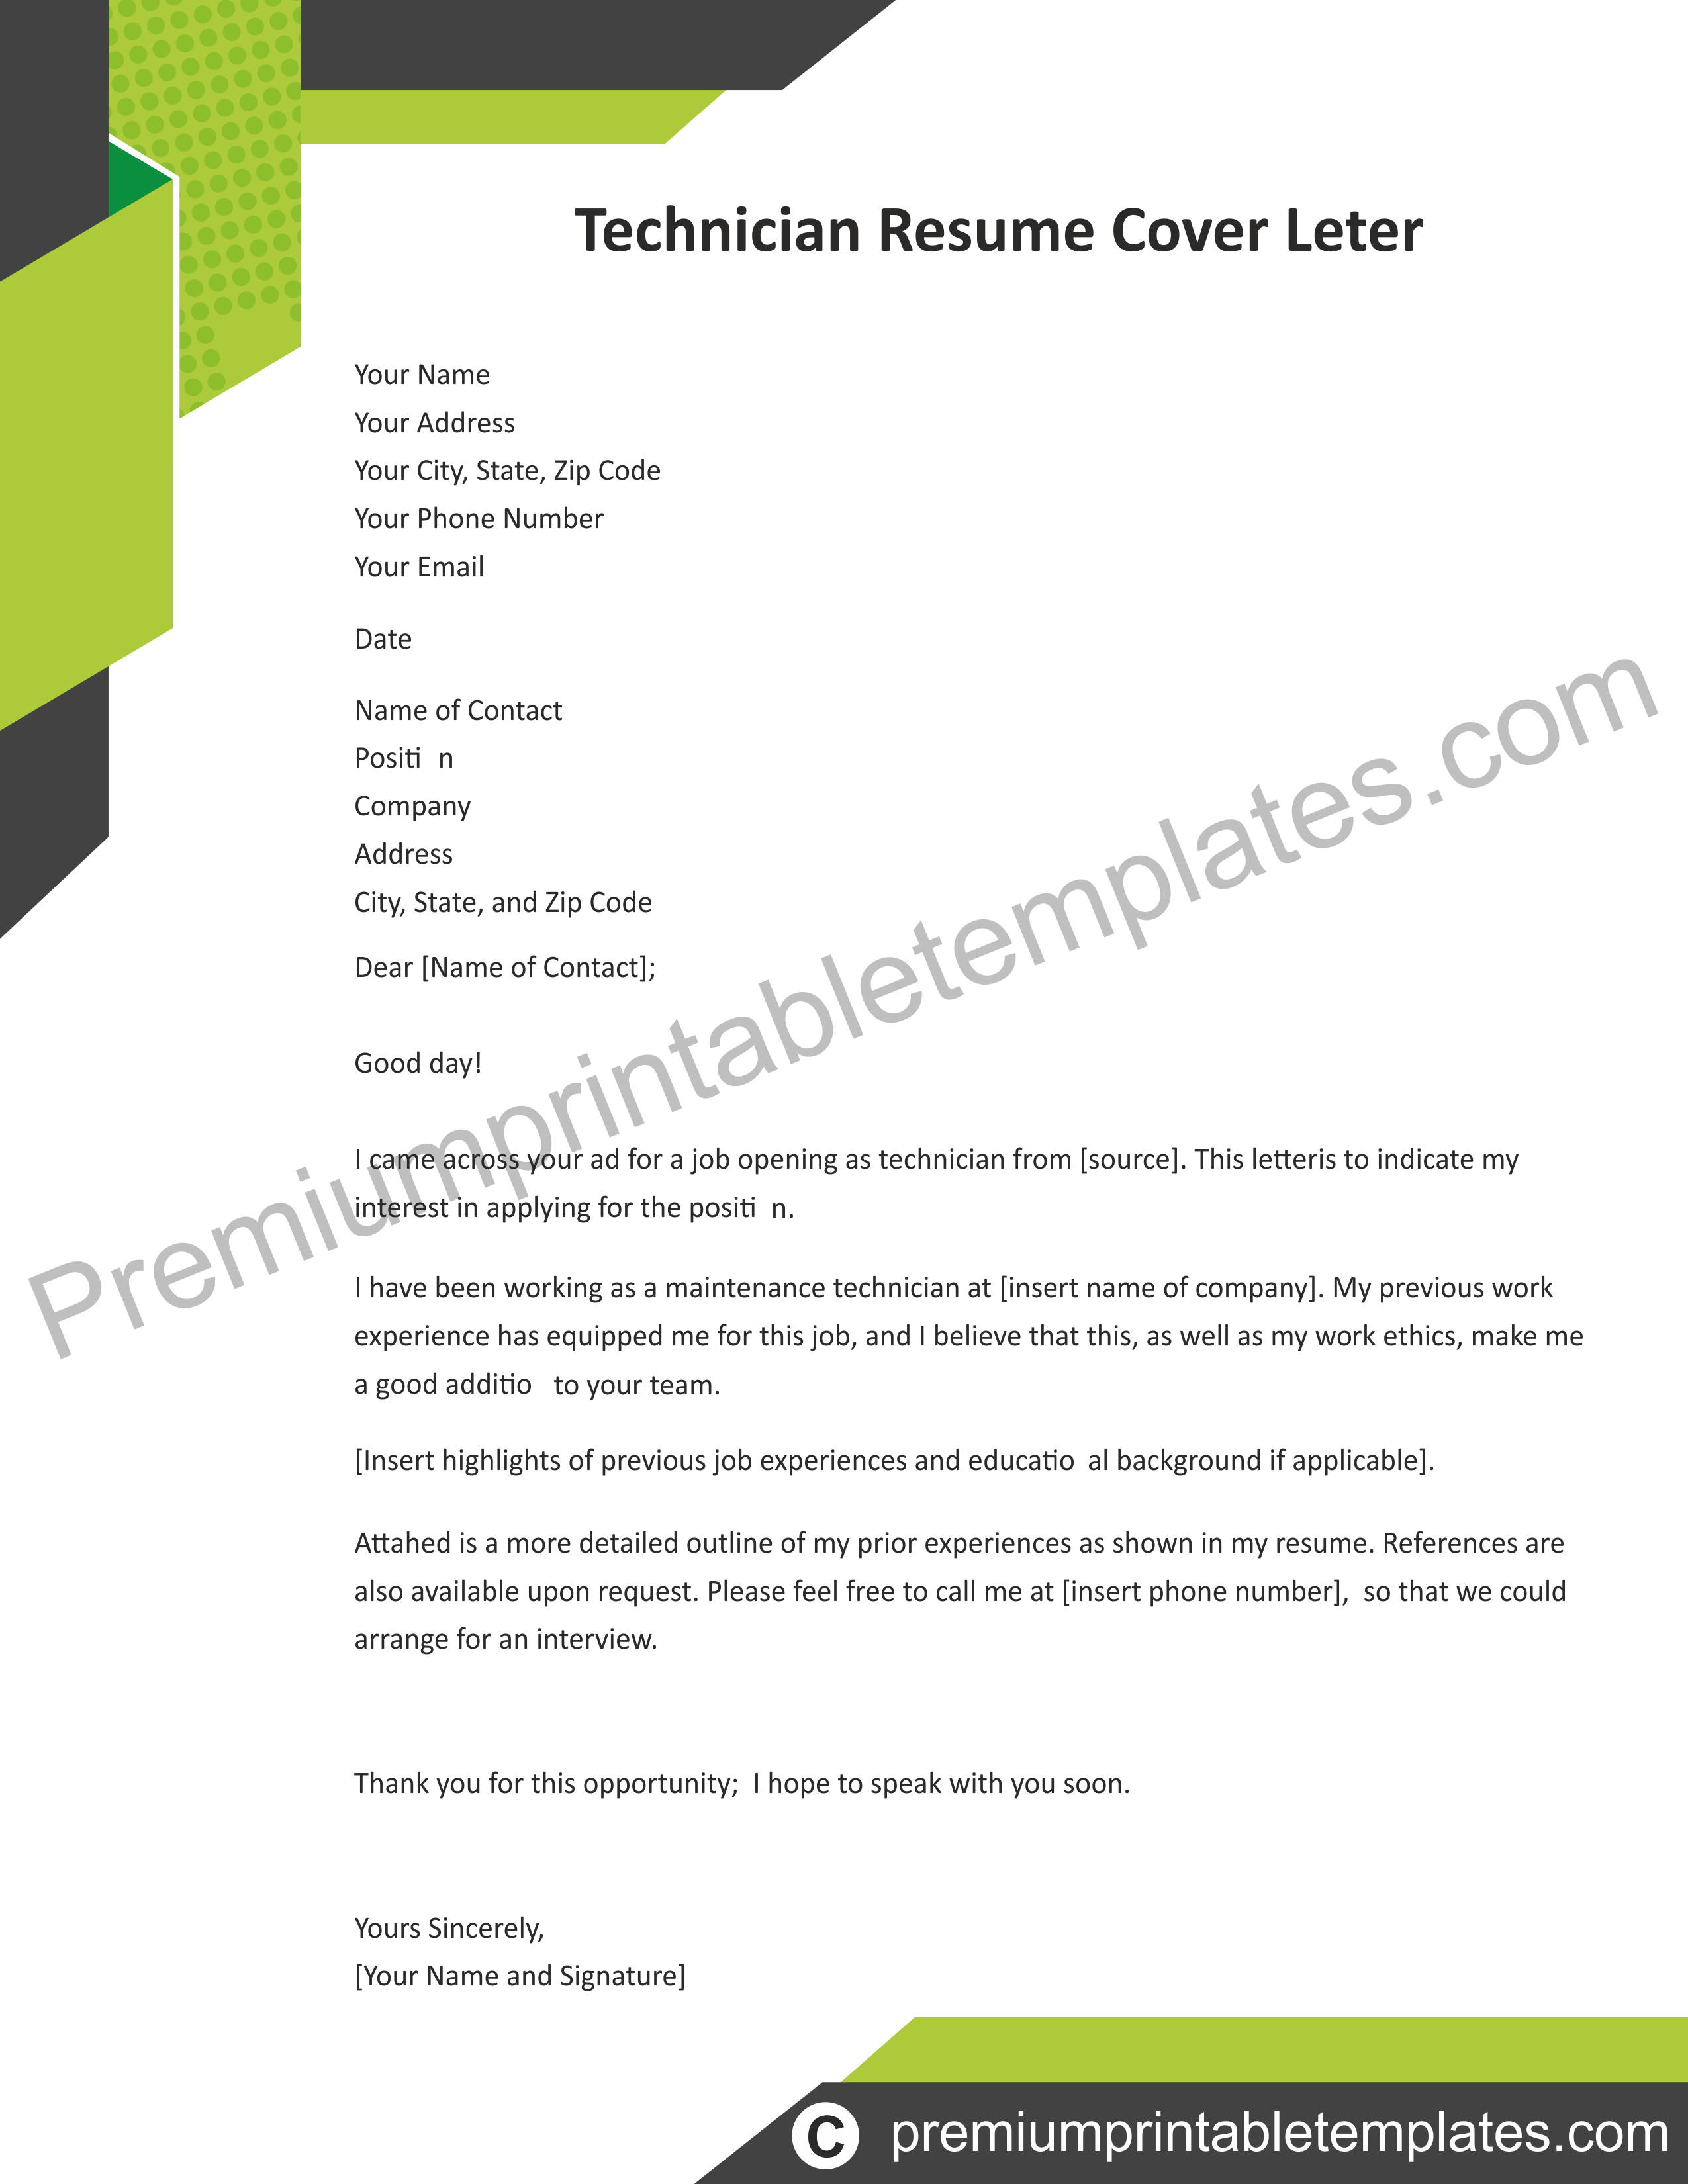 Application Cover Letter For Post Of Technician Pack Of 5 Premium Printable Templates